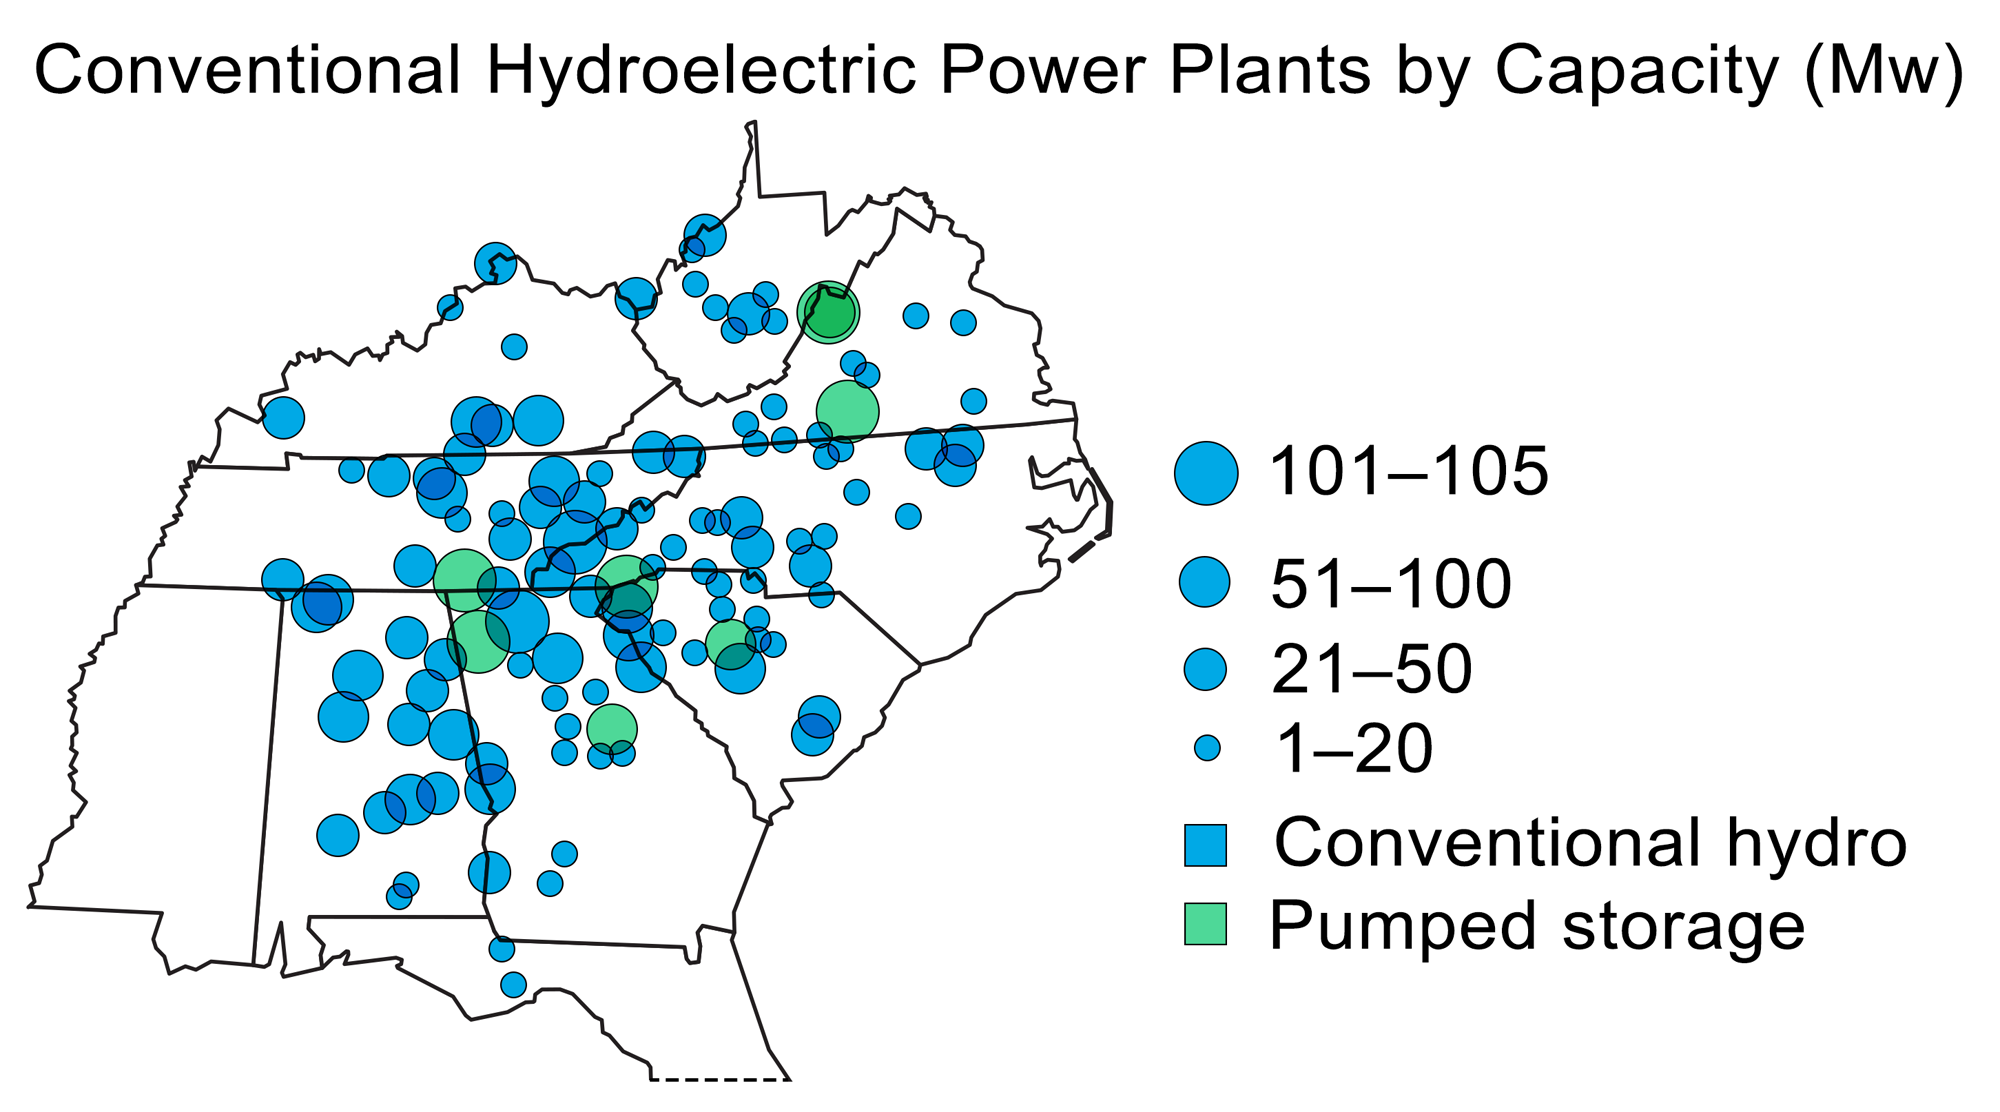 Map showing locations and generating capacity of hydroelectric plants in the Southeast.